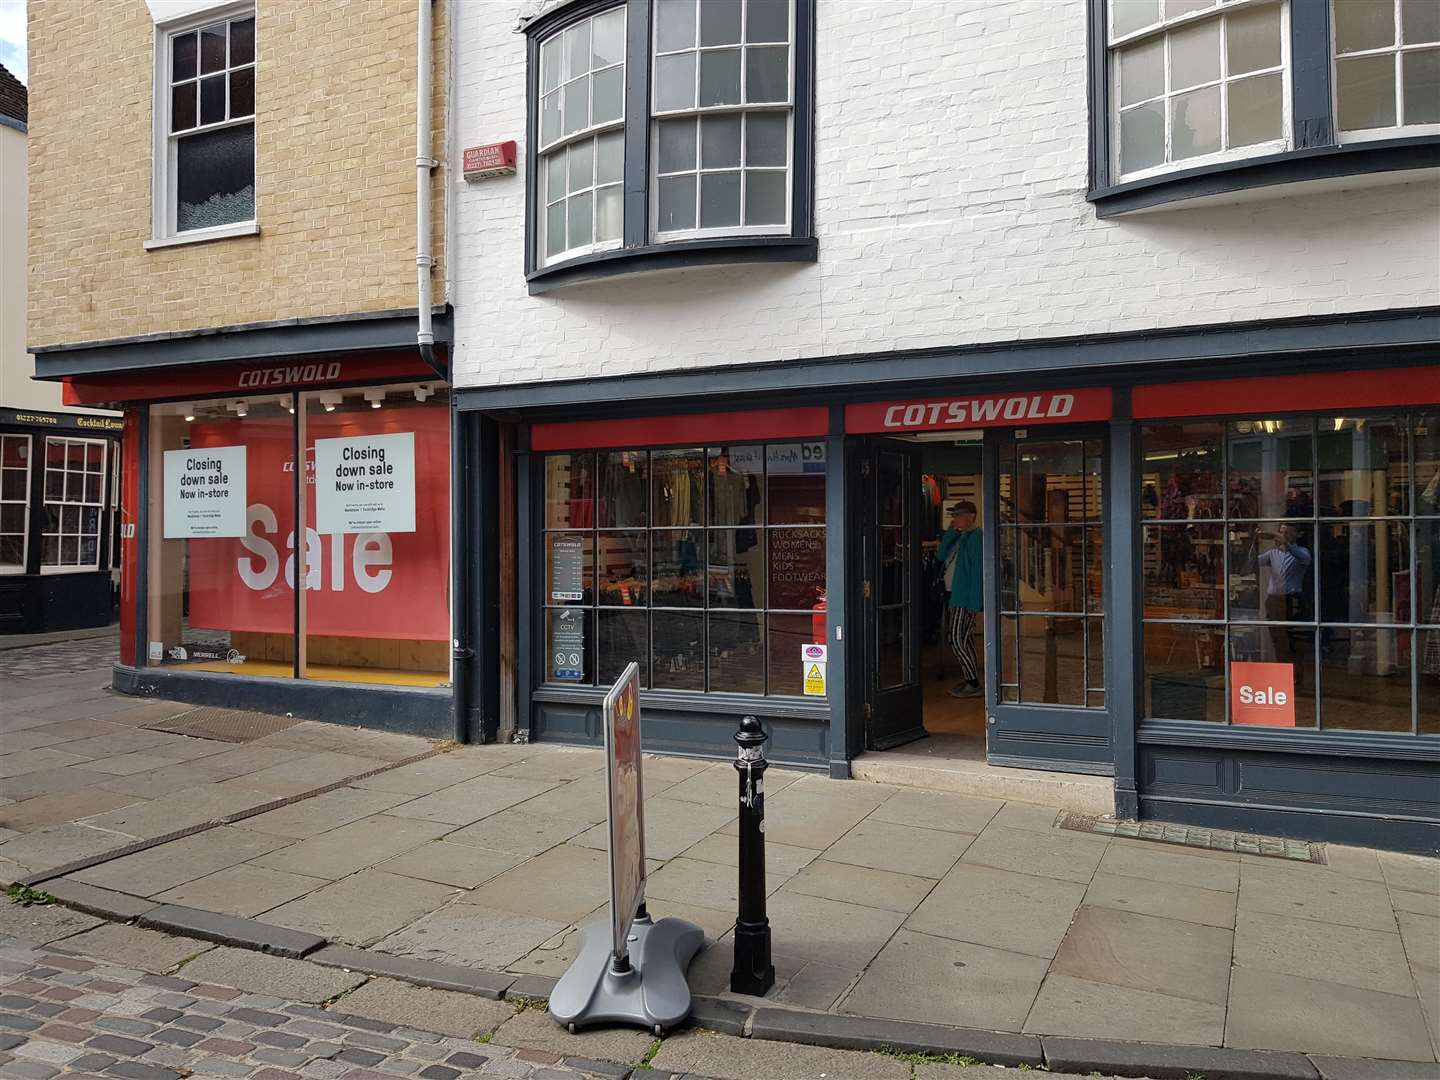 Cotswold Outdoor will close in October